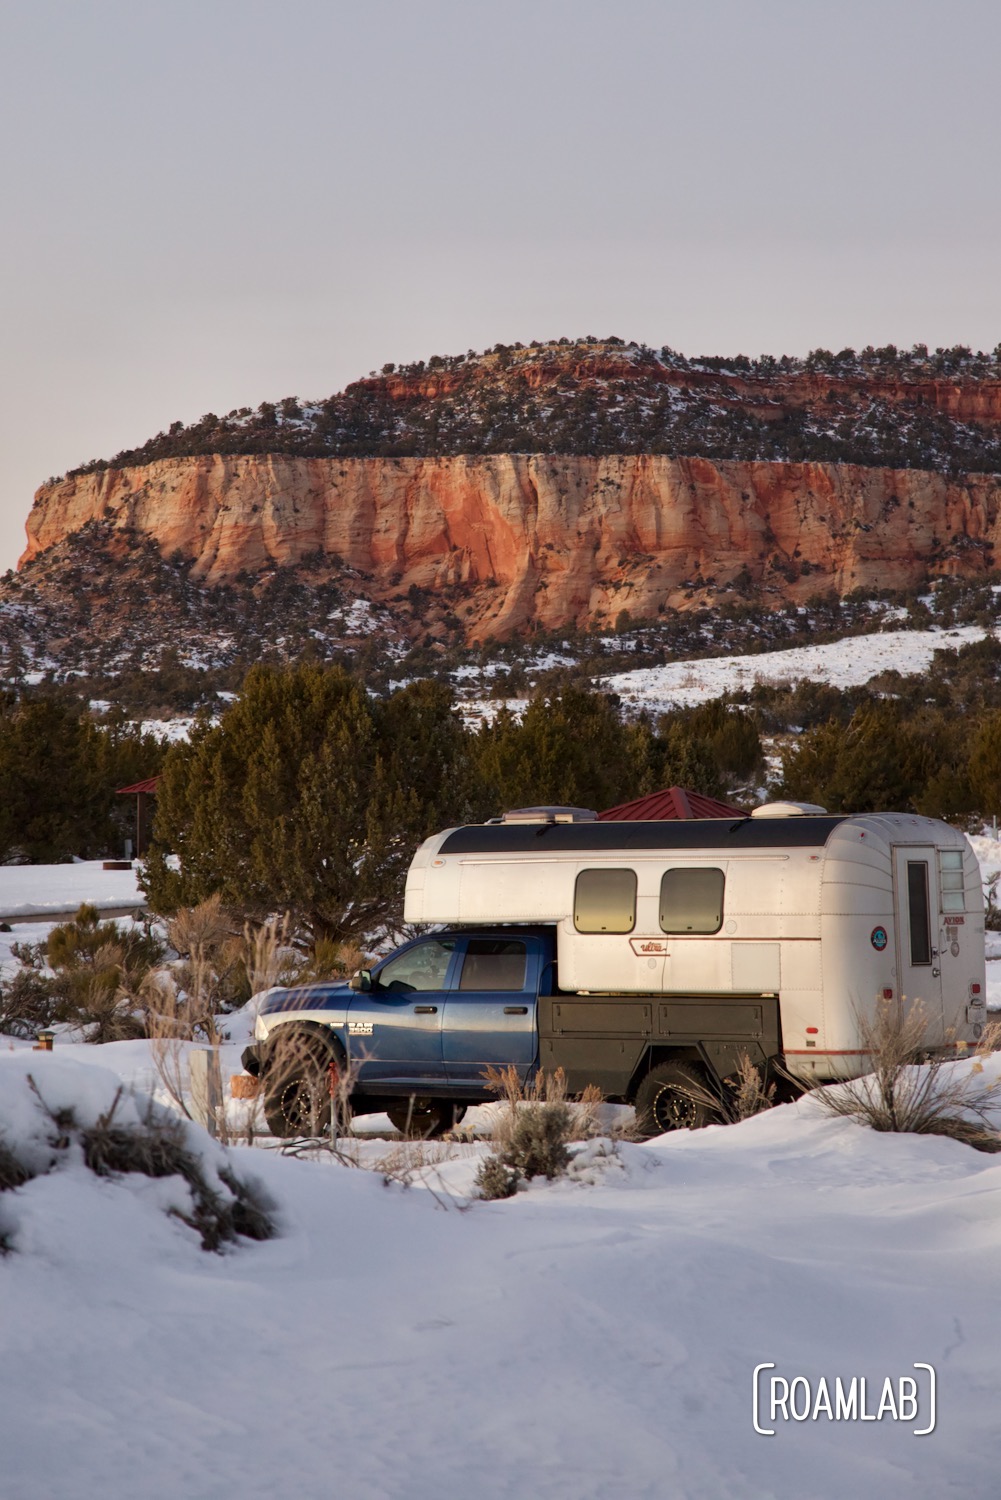 Avion C11 truck camper parked among snow drifts at sunset with pink cliffs rising in the distance at Coral Pink Sand Dunes State Park in Northern Arizona.